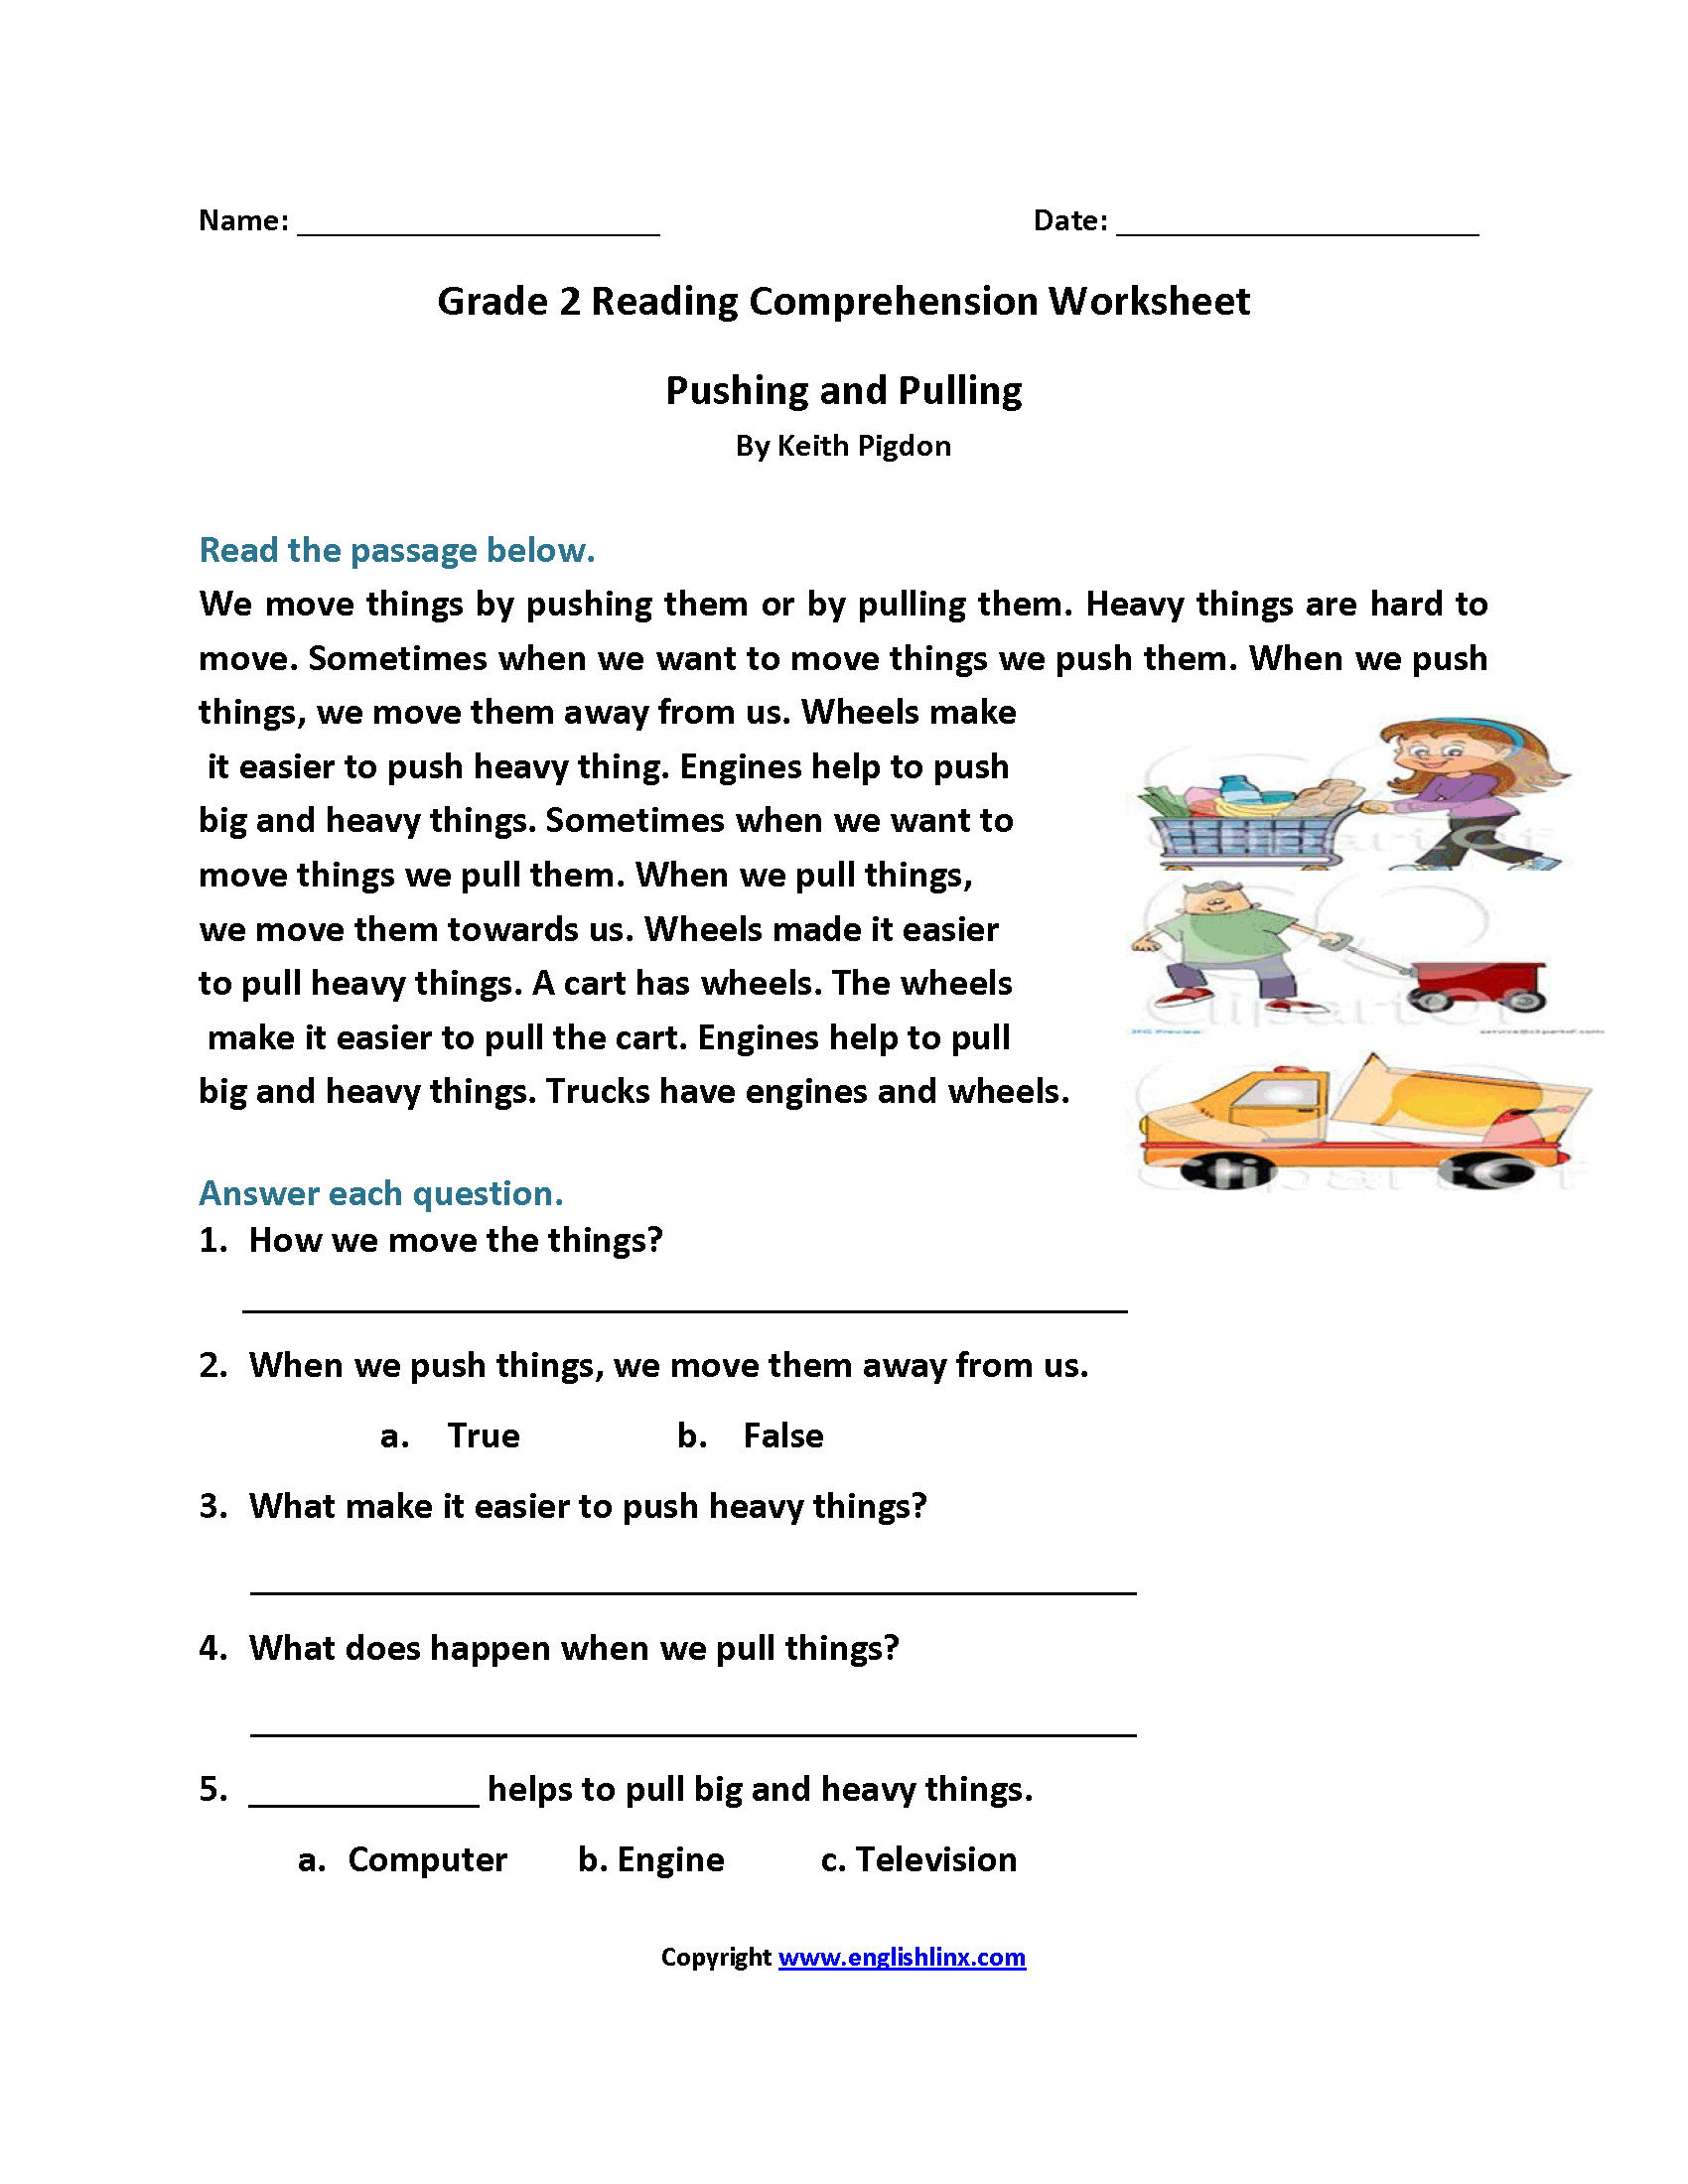 Pushing And Pulling Second Grade Reading Worksheets Reading Comprehension Worksheets 2nd Grade Reading Worksheets Comprehension Worksheets